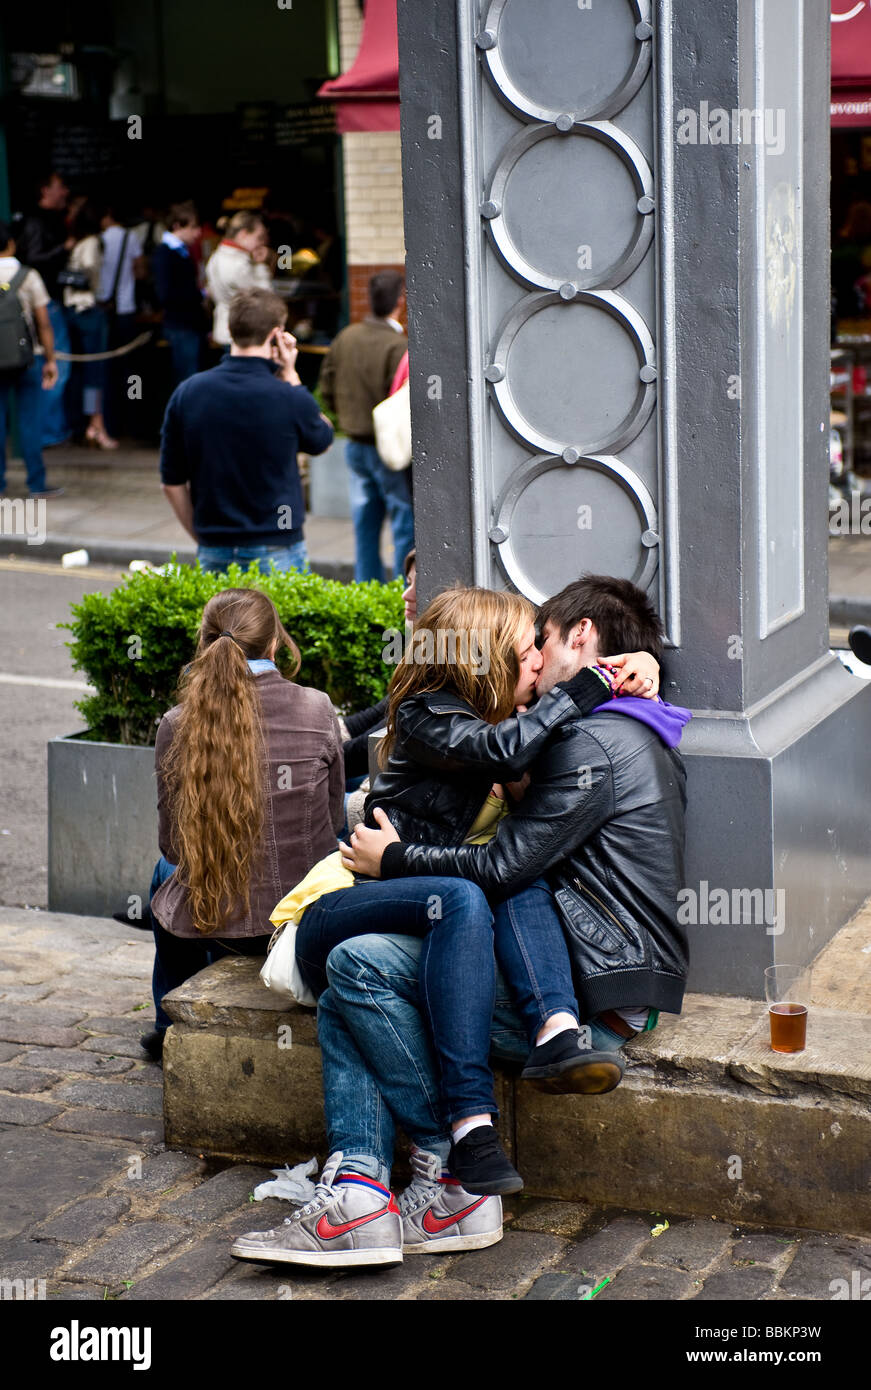 Two young people kissing at Borough Market in London. Stock Photo